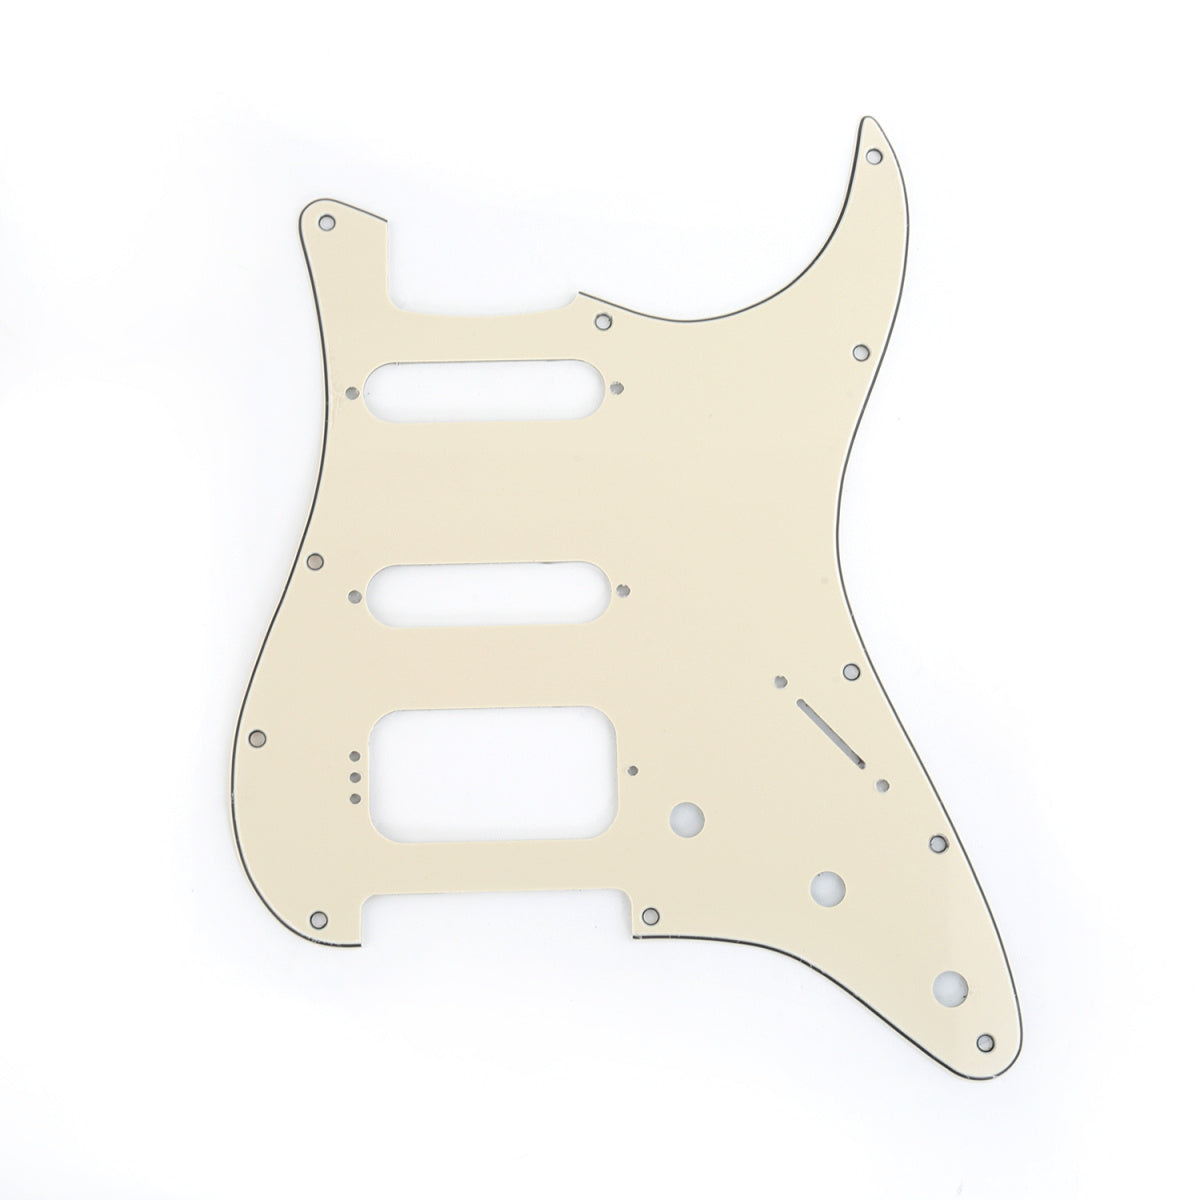 Musiclily Pro 11-Hole Round Corner HSS Guitar Strat Pickguard for USA/Mexican Stratocaster 4-screw Humbucking Mounting Open Pickup, 3Ply Cream